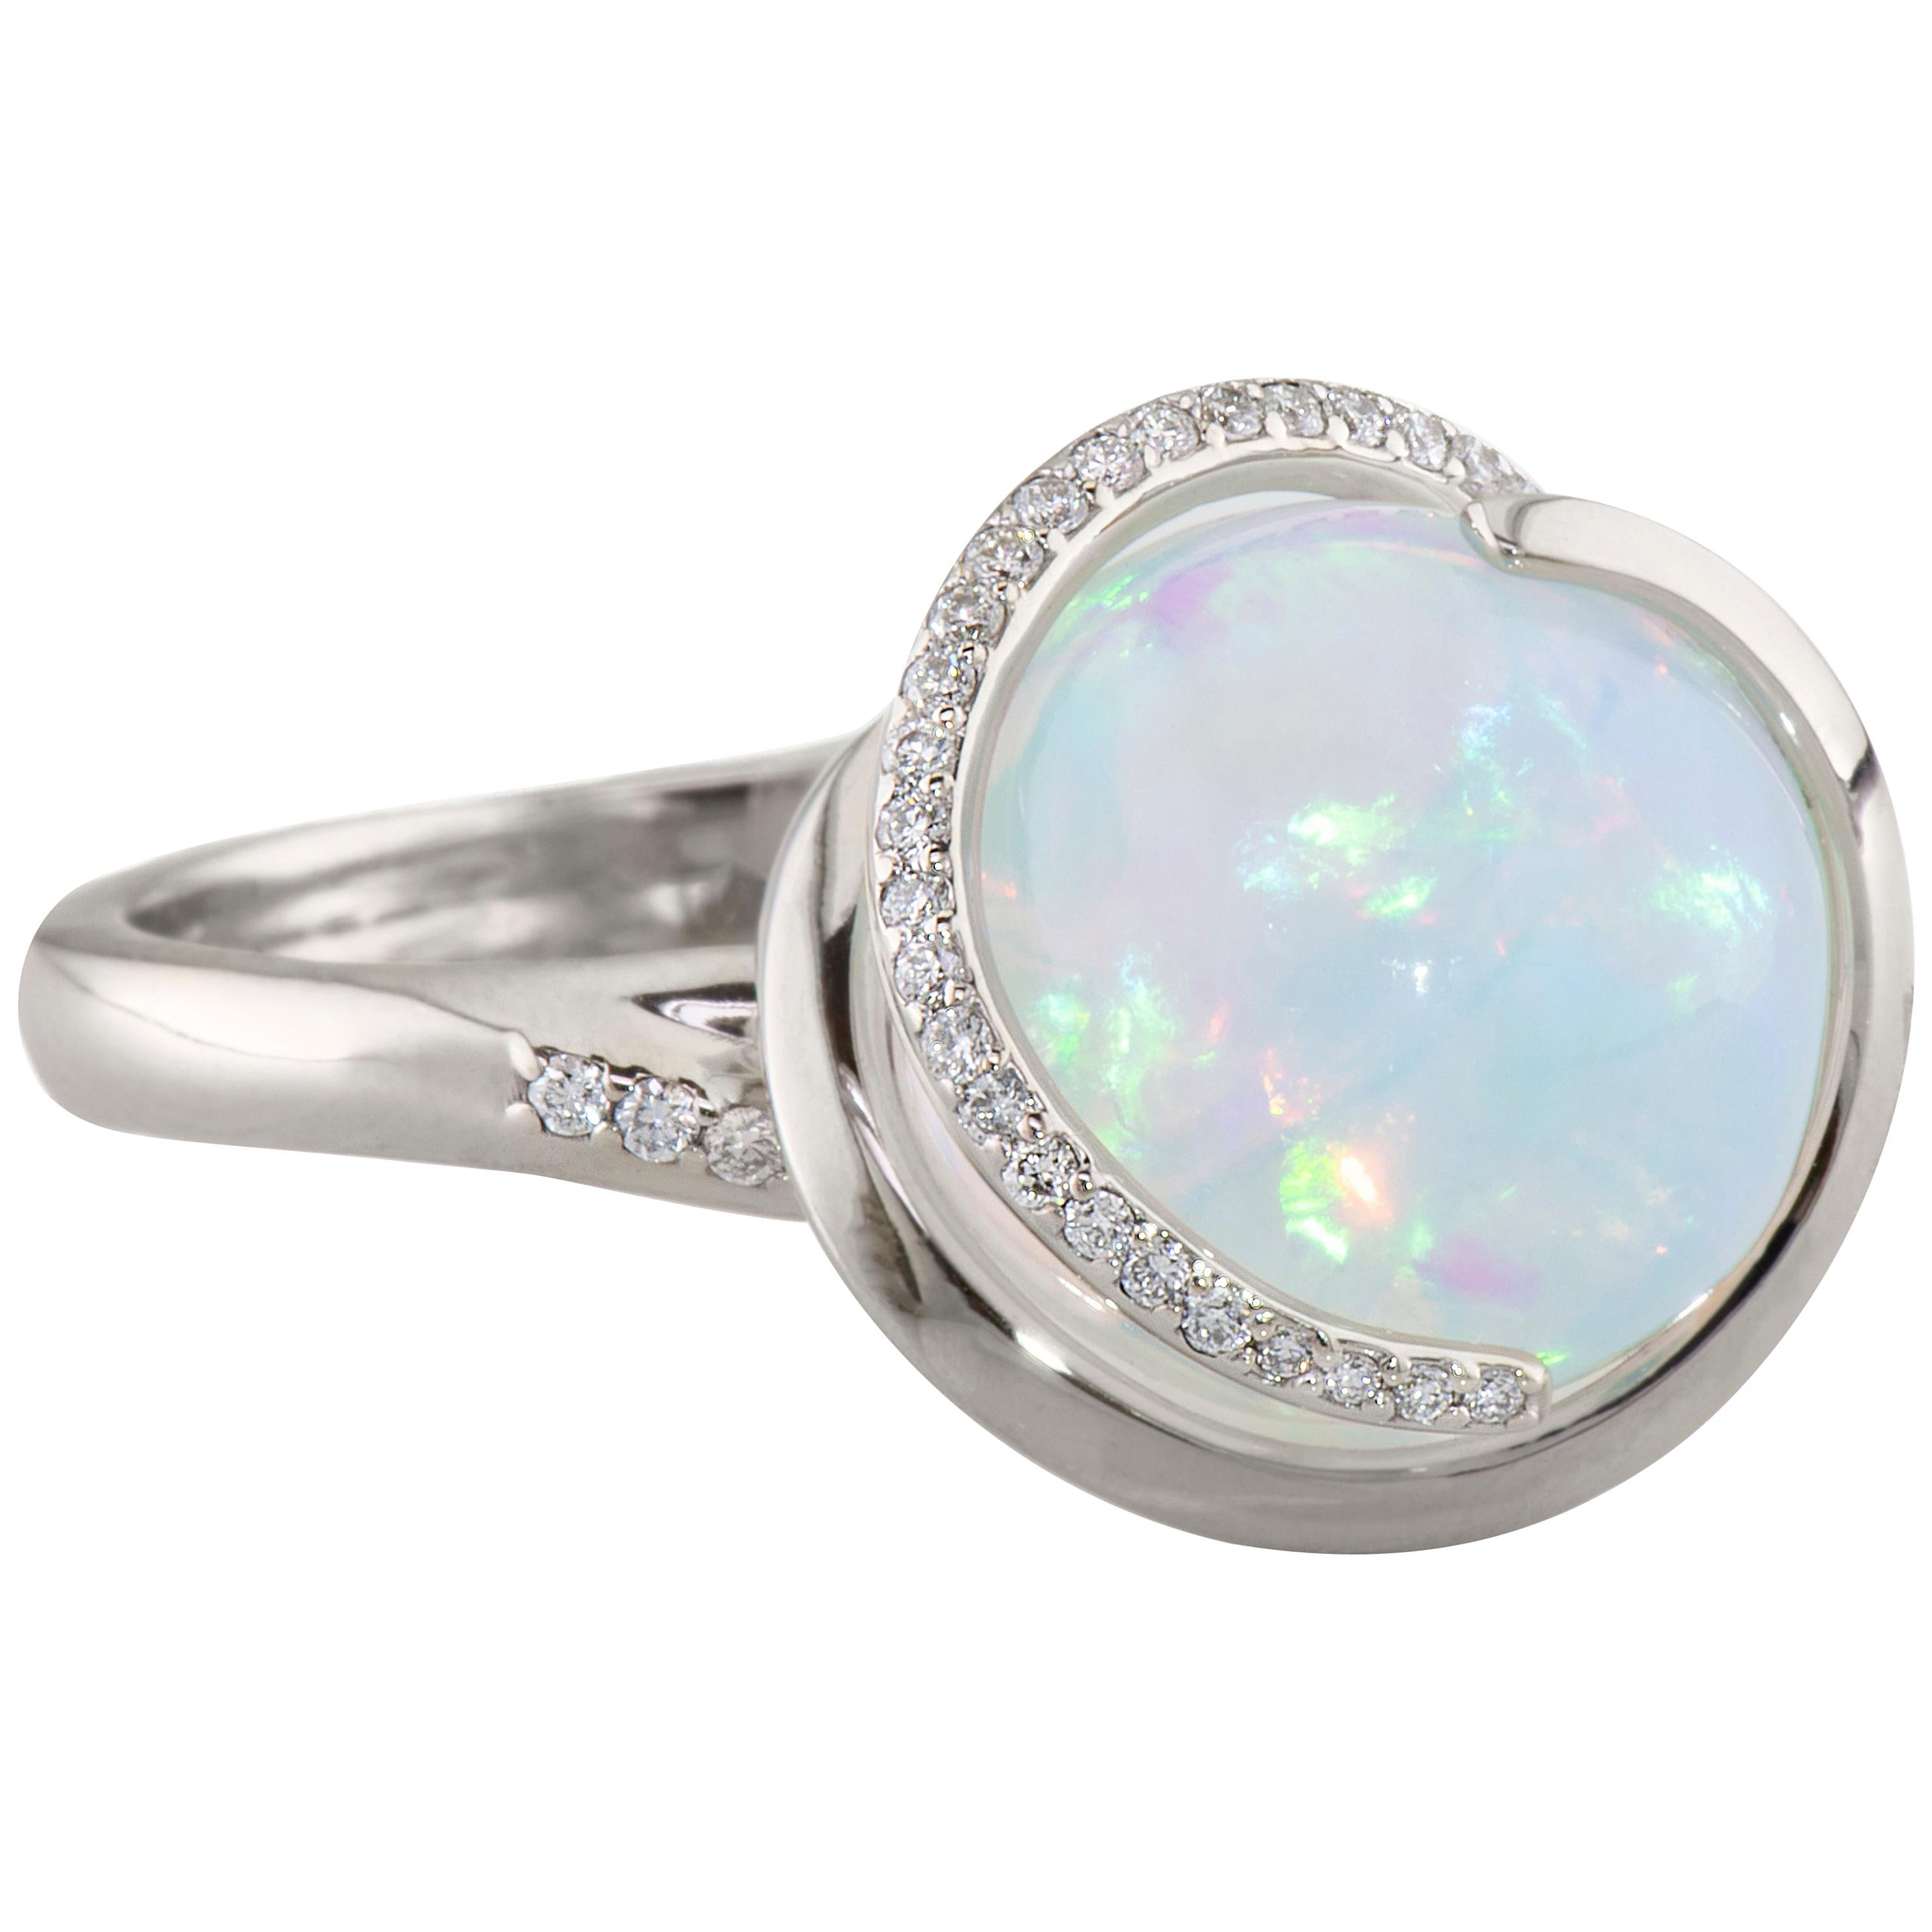 Dianna Rae Jewelry White Gold Opal Orb Diamond Cocktail Ring